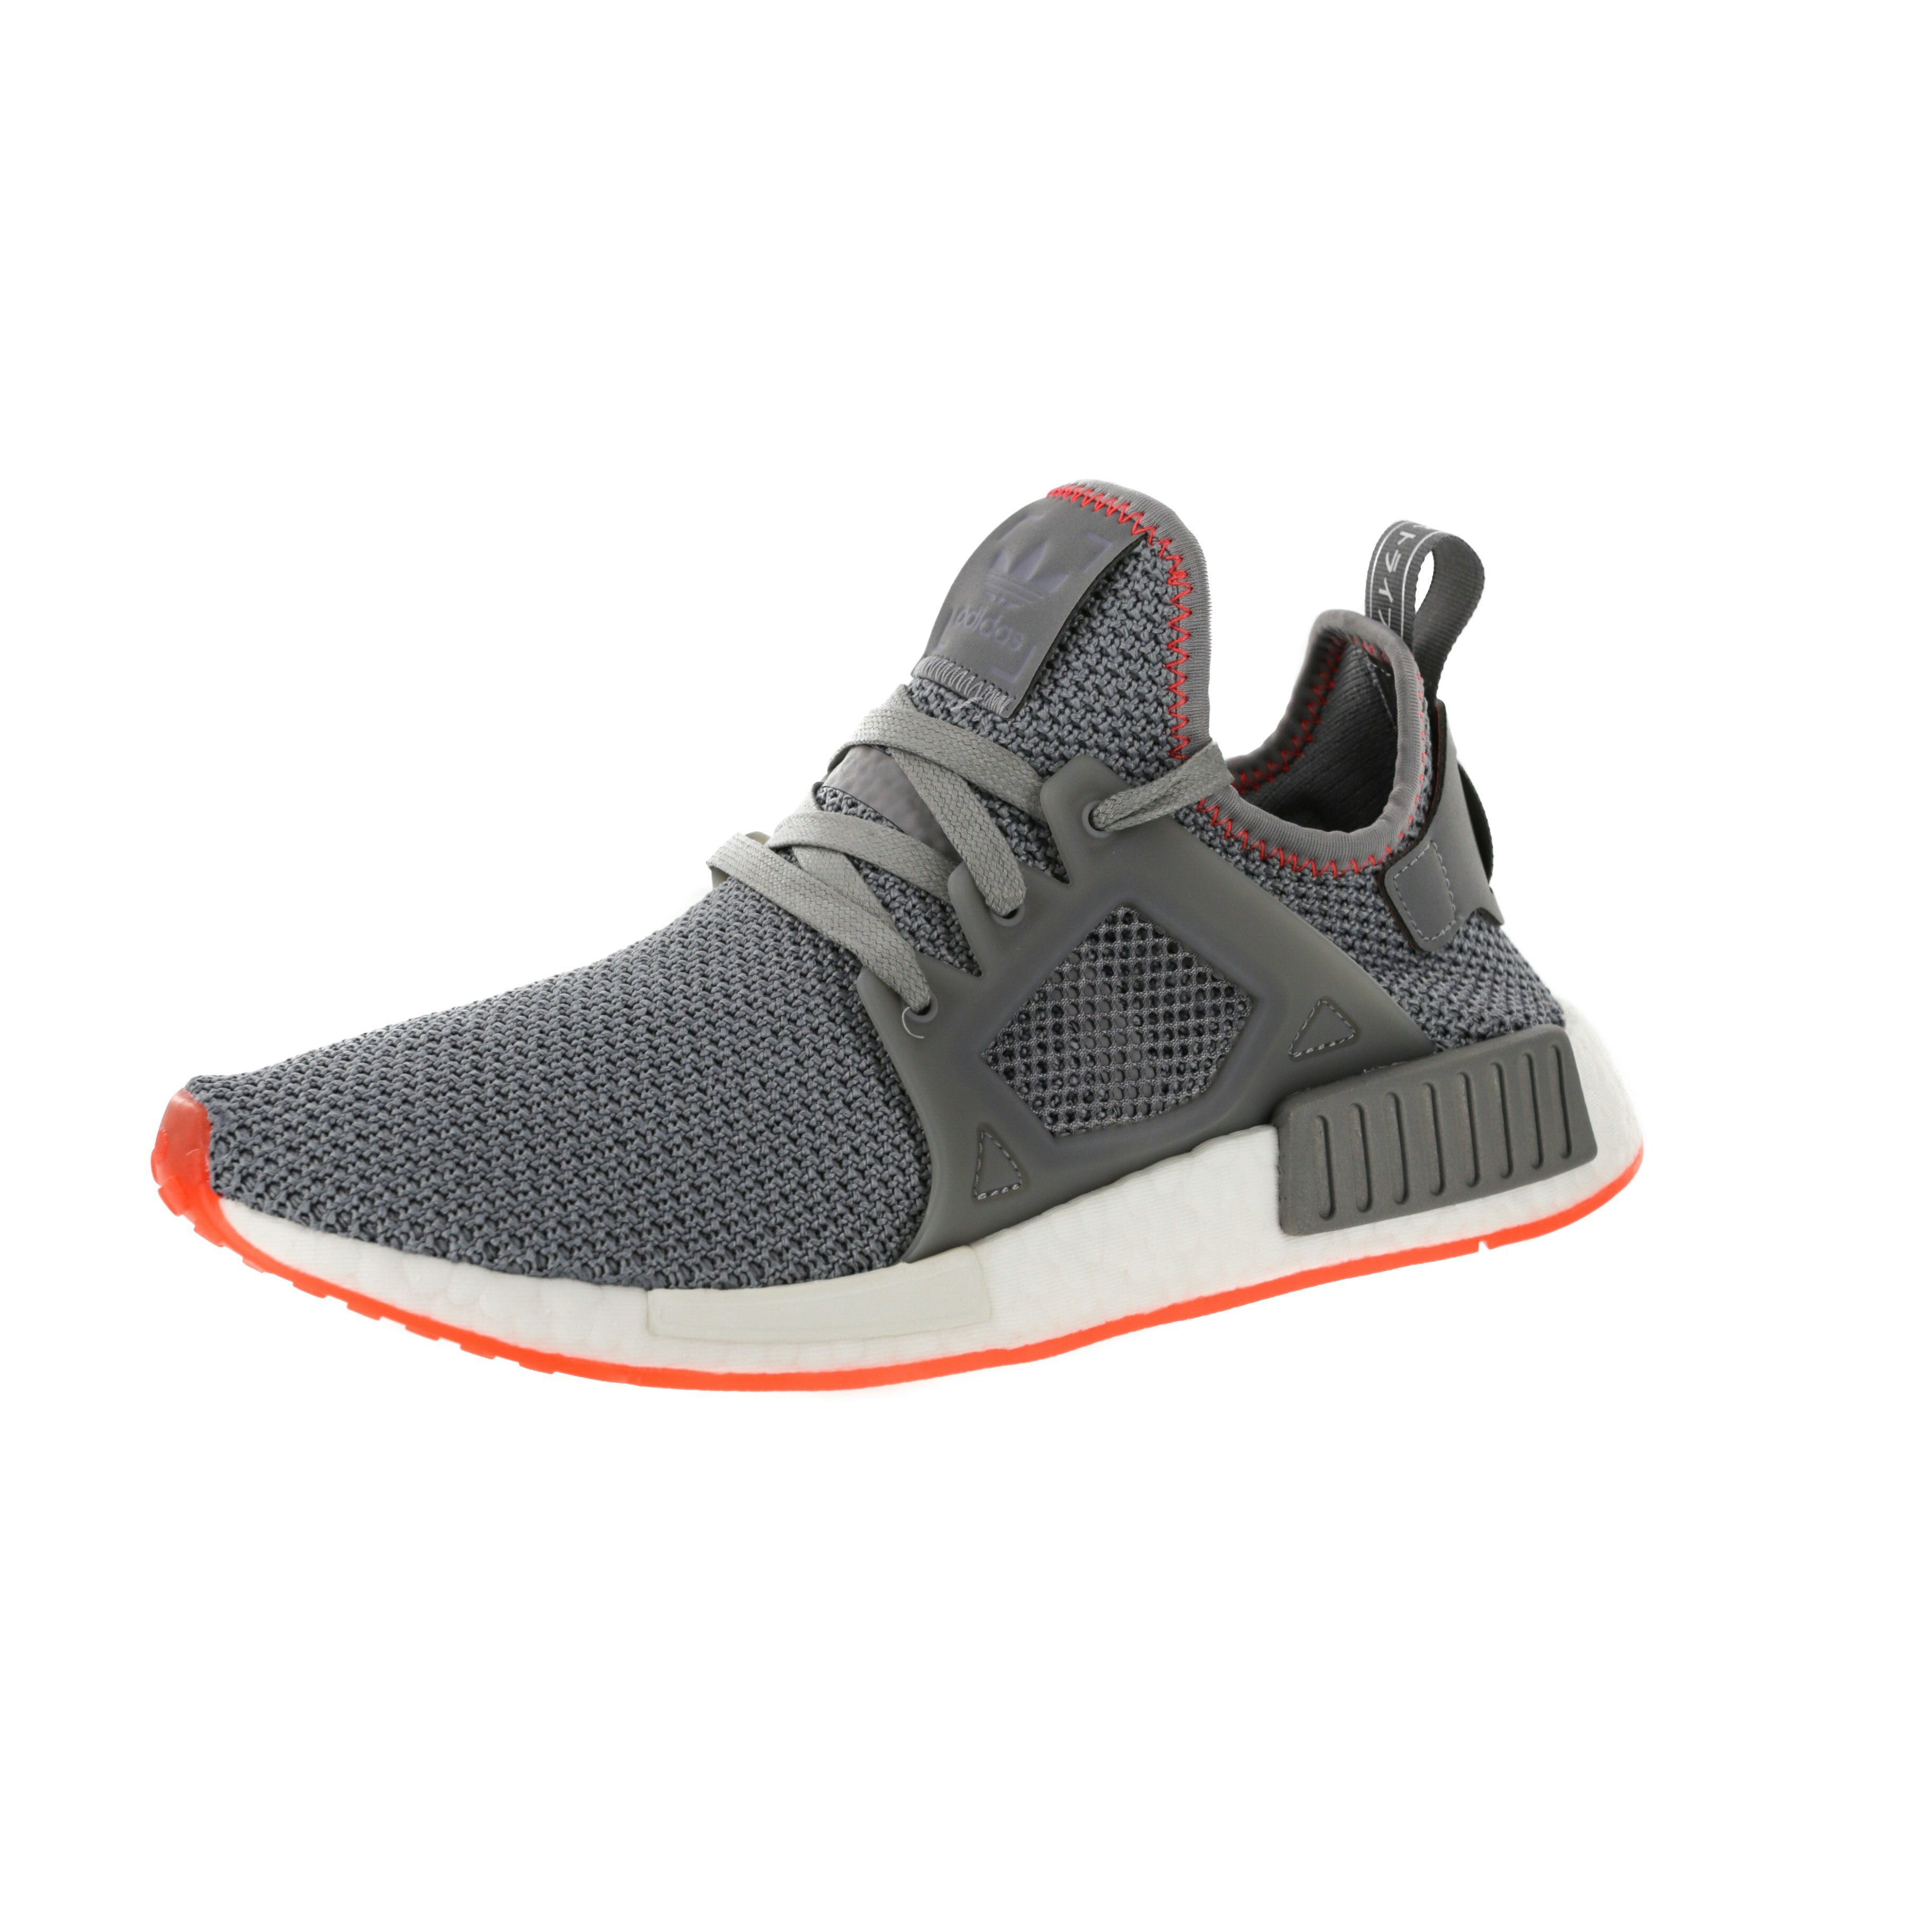 Adidas nmd xr1 'and' core black by1909 buy online order ne.